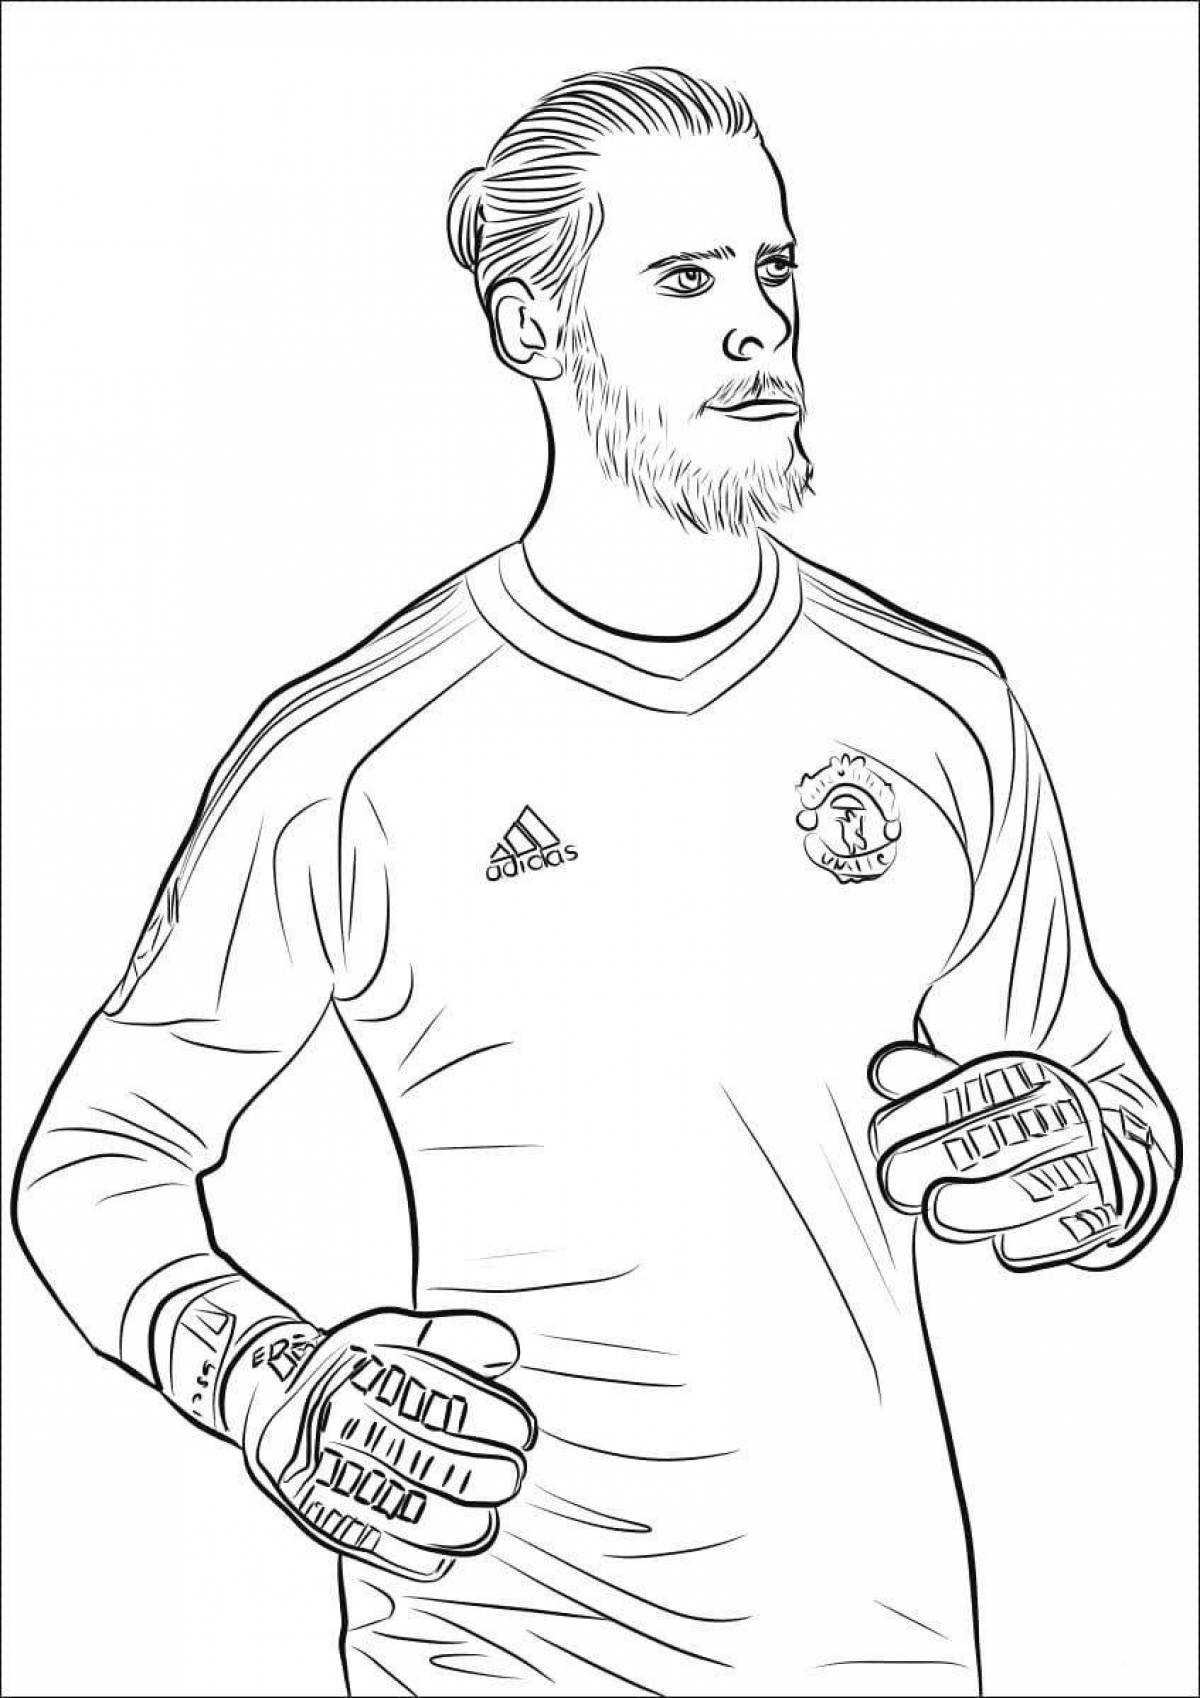 Exquisite van dyck soccer player coloring book